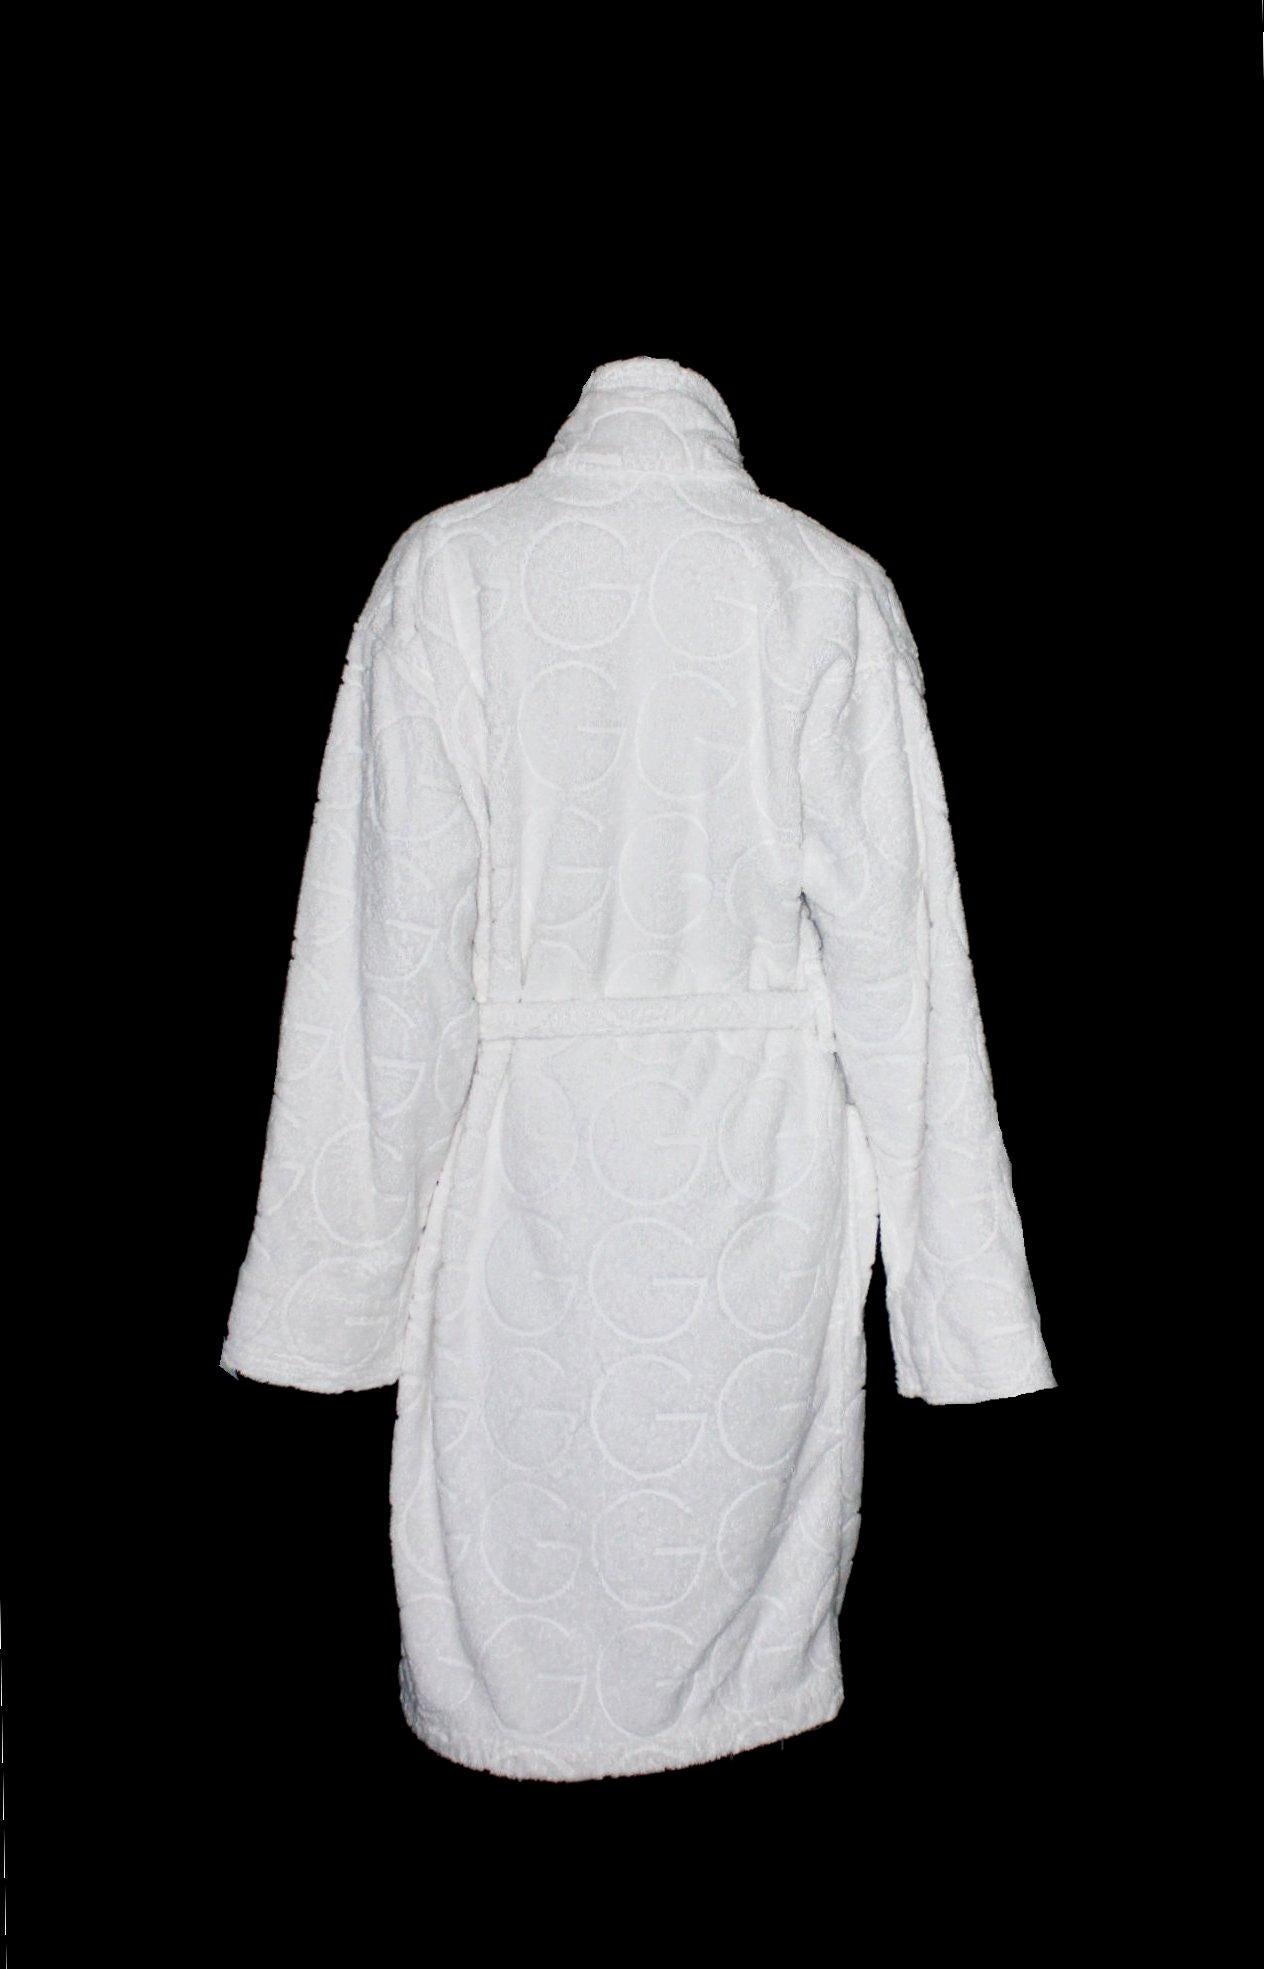 A great piece created by Tom Ford for Gucci
This gorgeous bathrobe is made out of finest fthick terrycloth fabric
It has the famous G logo all over
From one of Tom Fords strongest collections in 1990s
Amazing design
100% cotton
Size S
Made in Italy